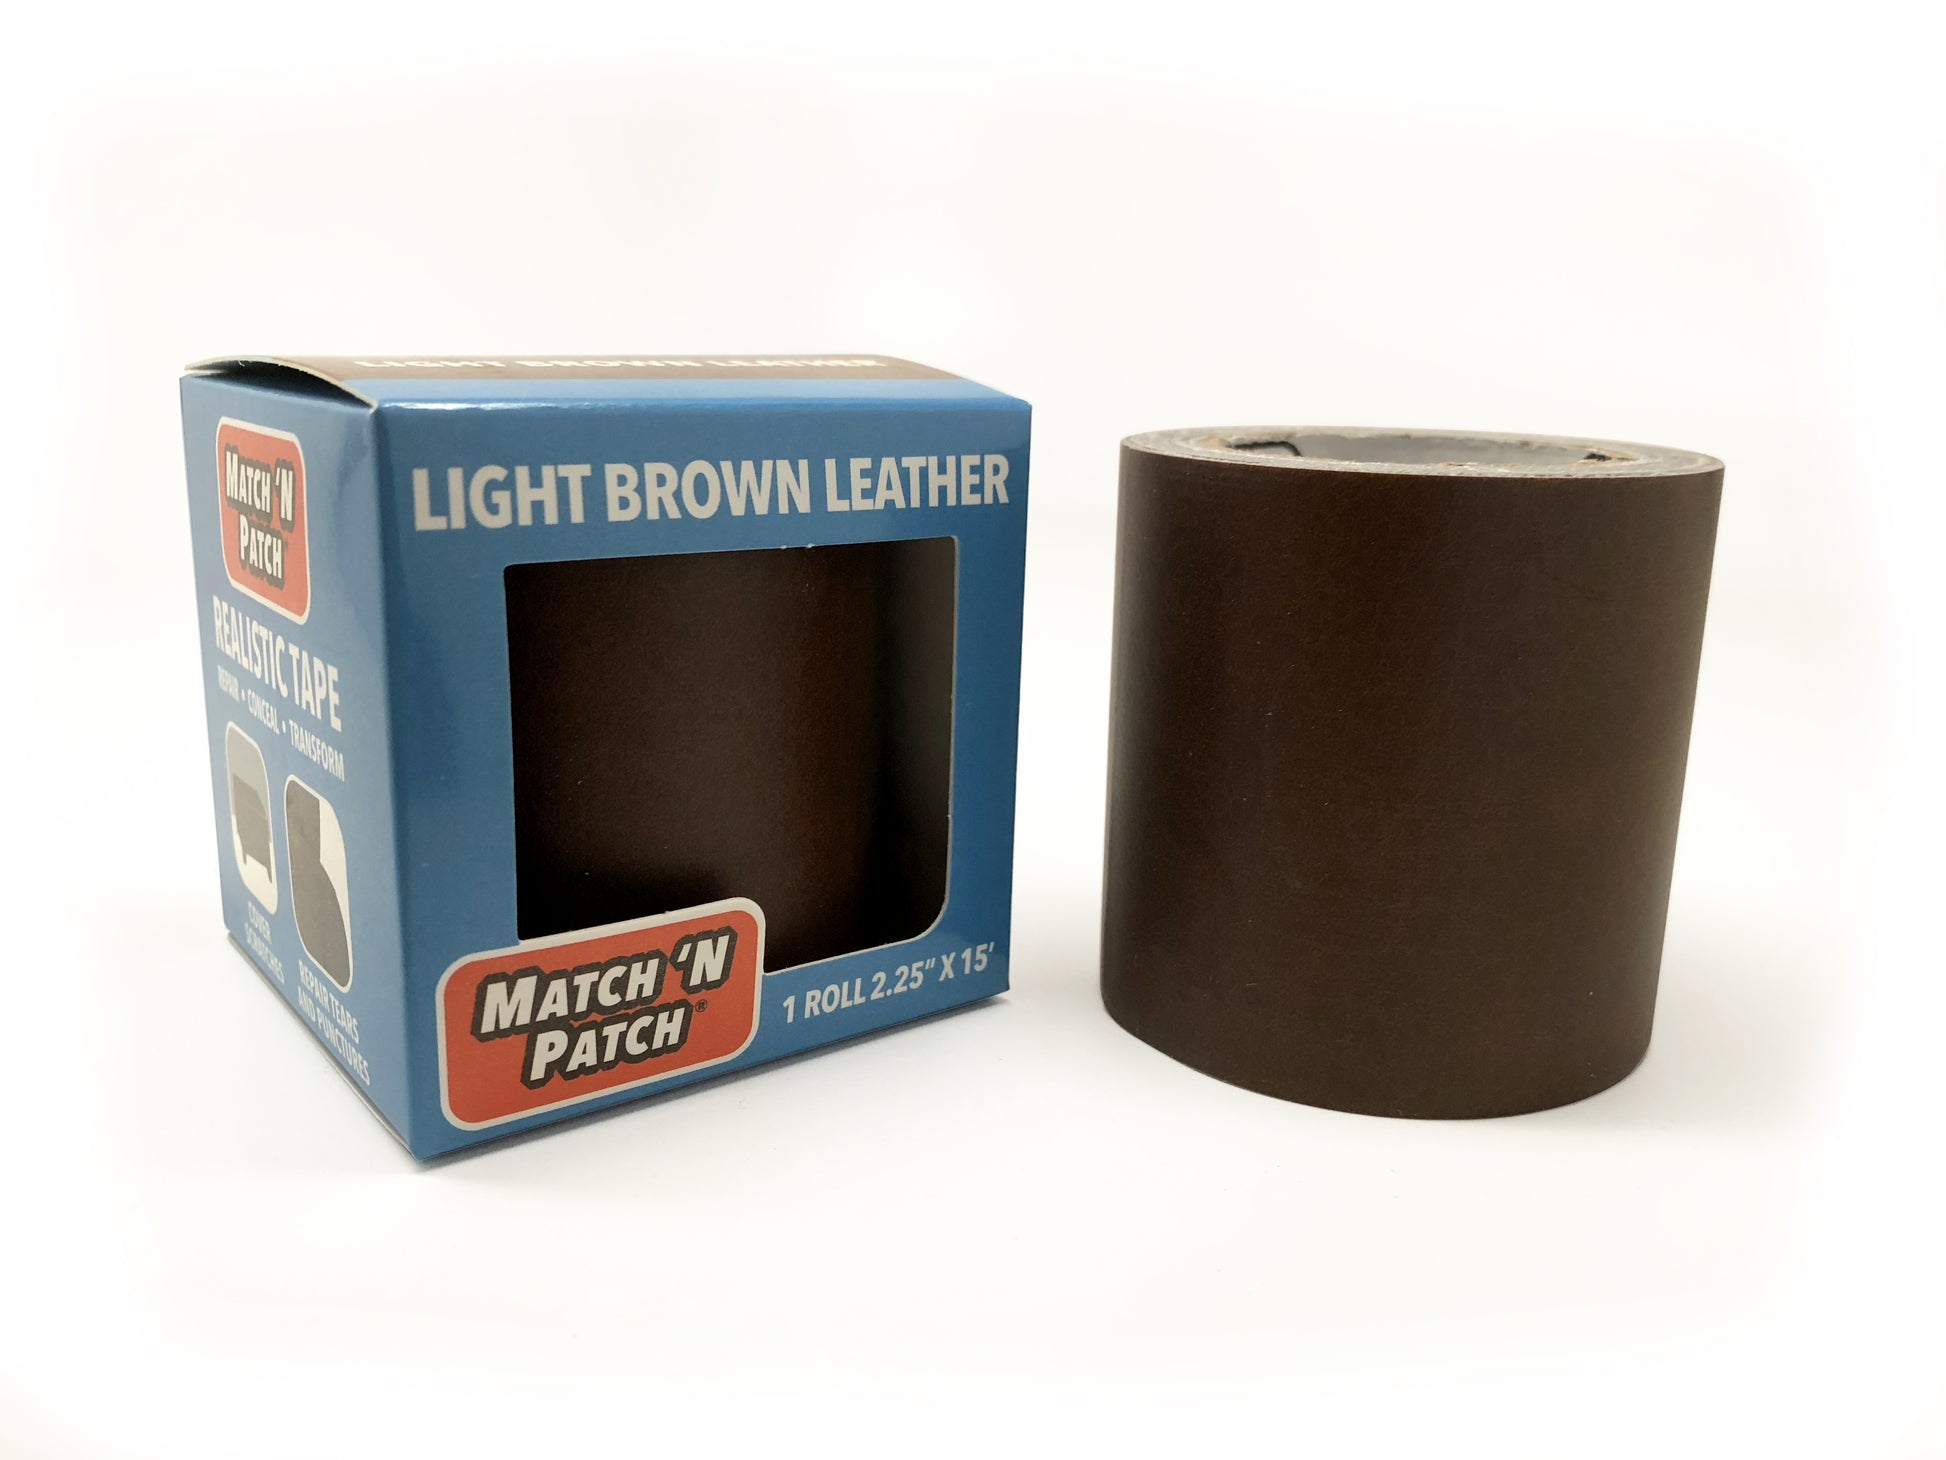 MATCH 'N PATCH Realistic Leather Repair Tape, Dark Brown, 2.25 inch x 15  feet